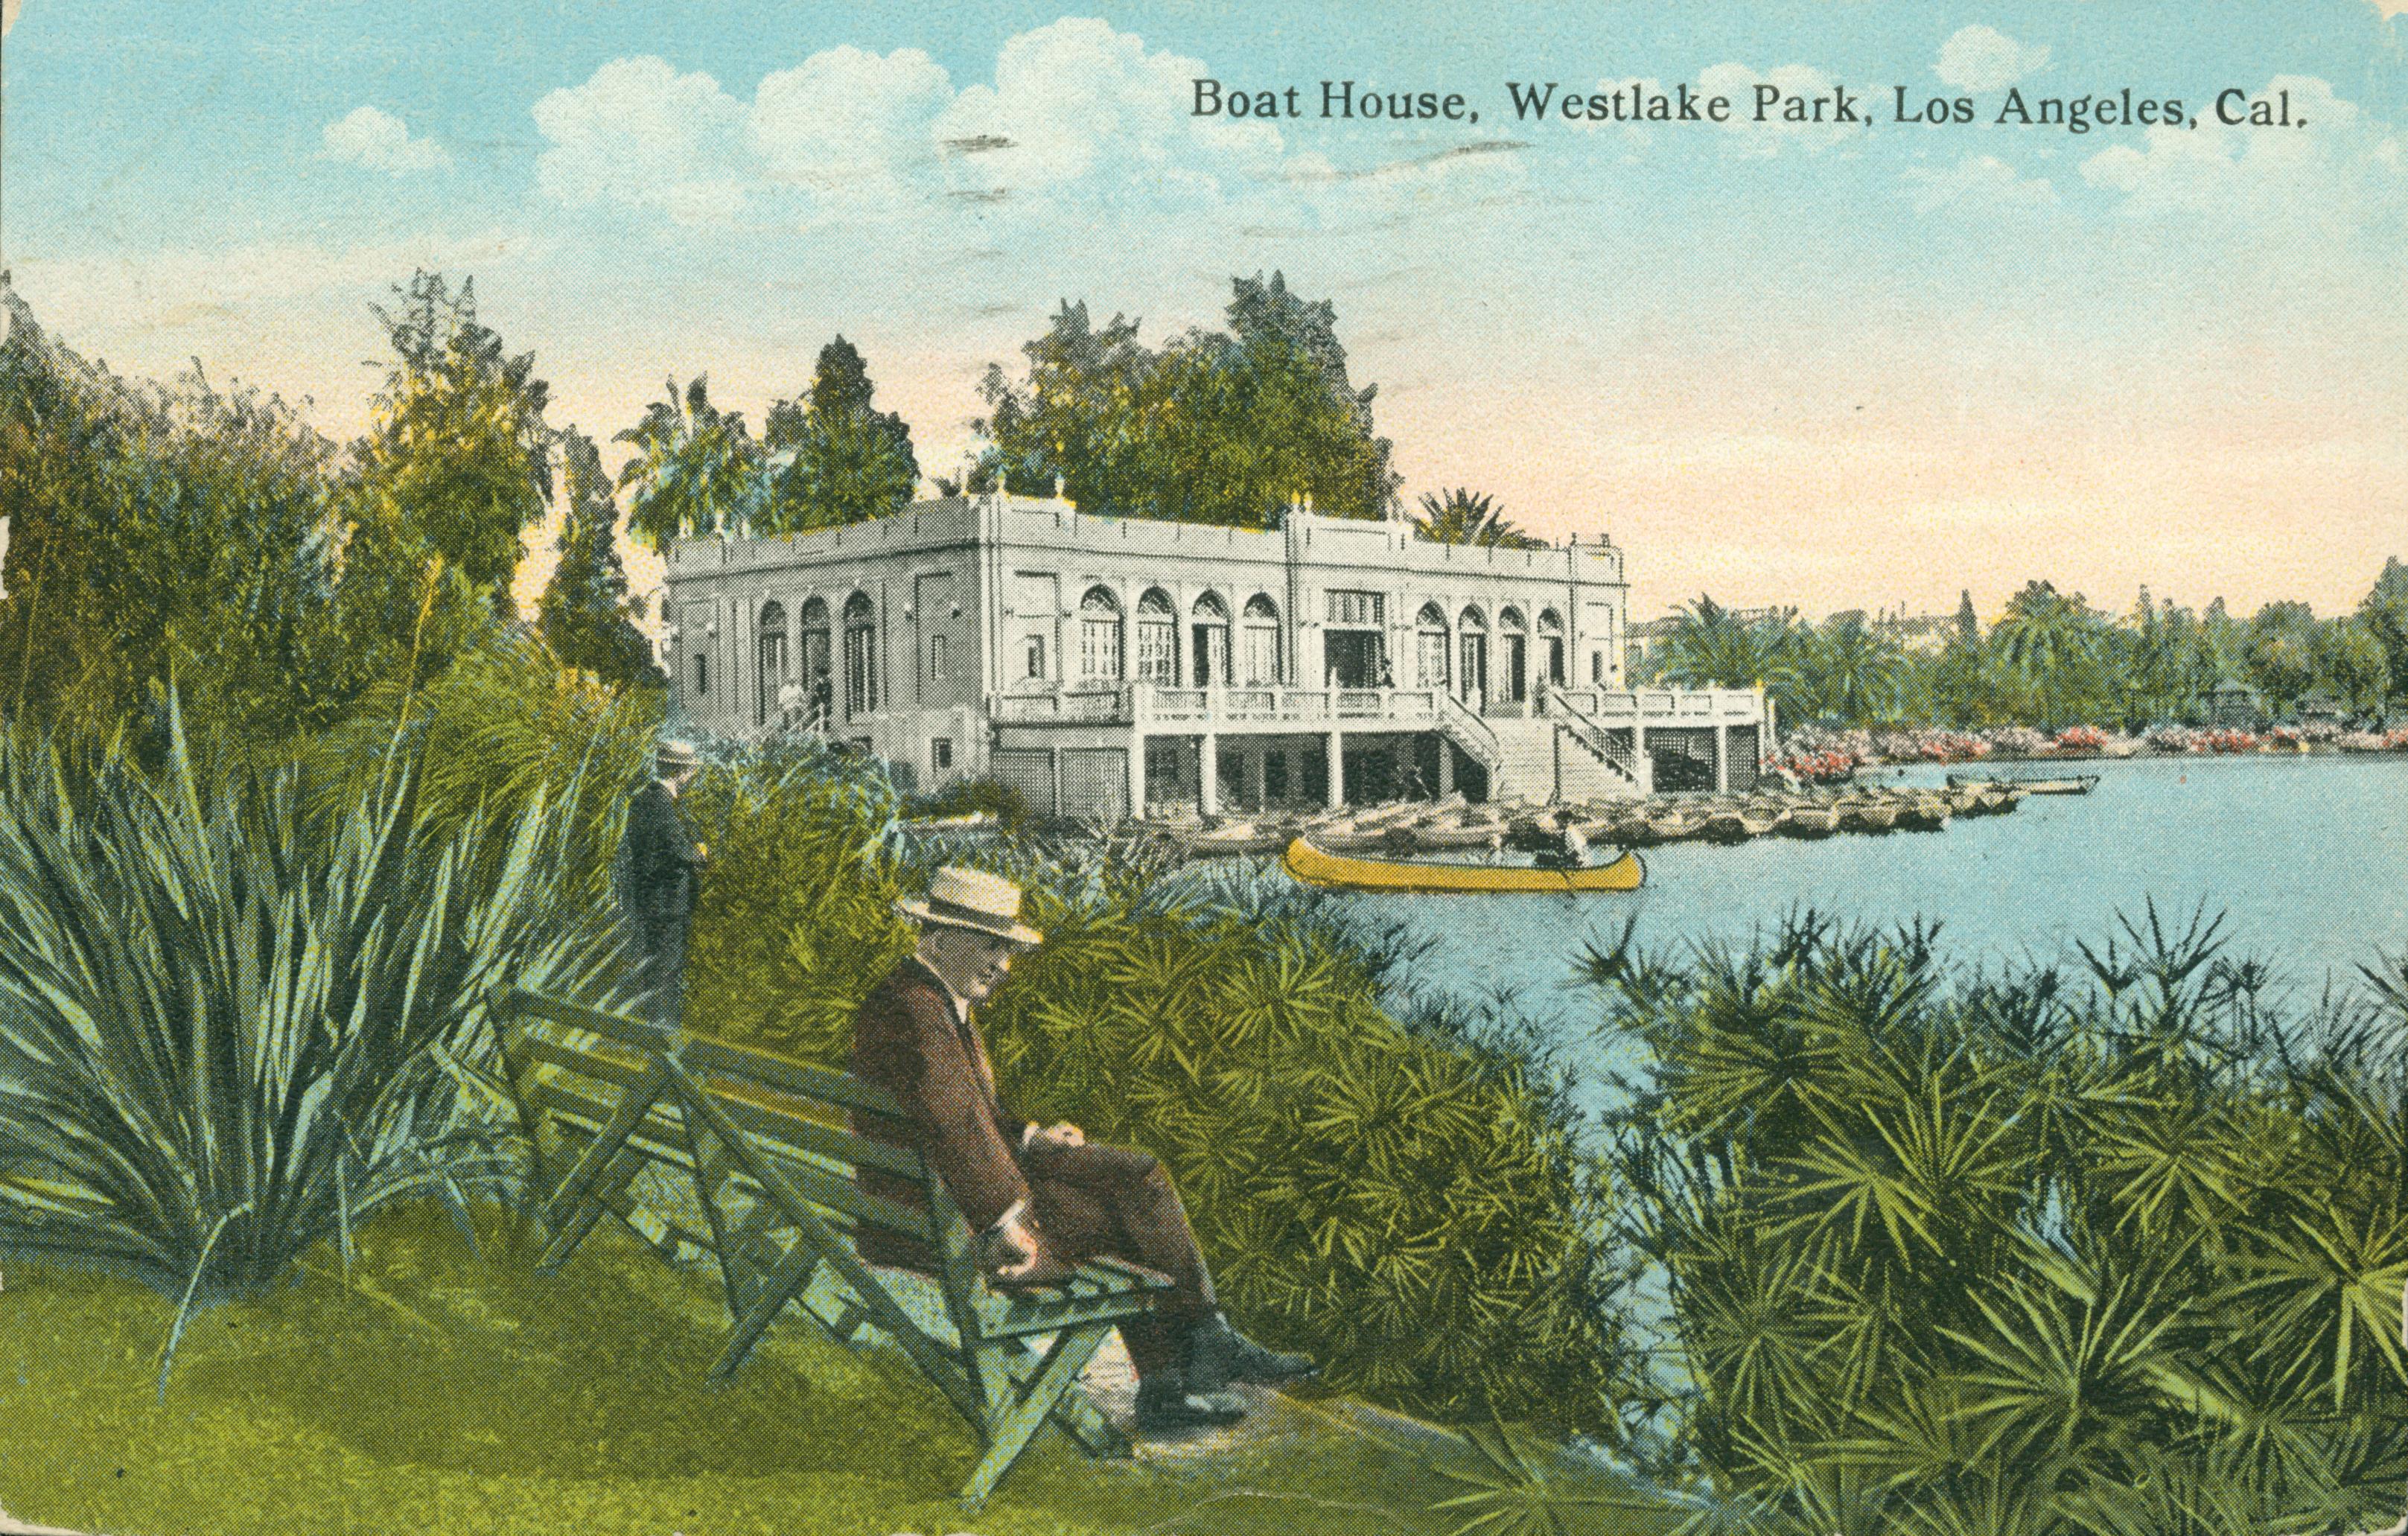 This postcard shows a man seated on a bridge, overlooking a lake, with a boathouse and canoe in the background.